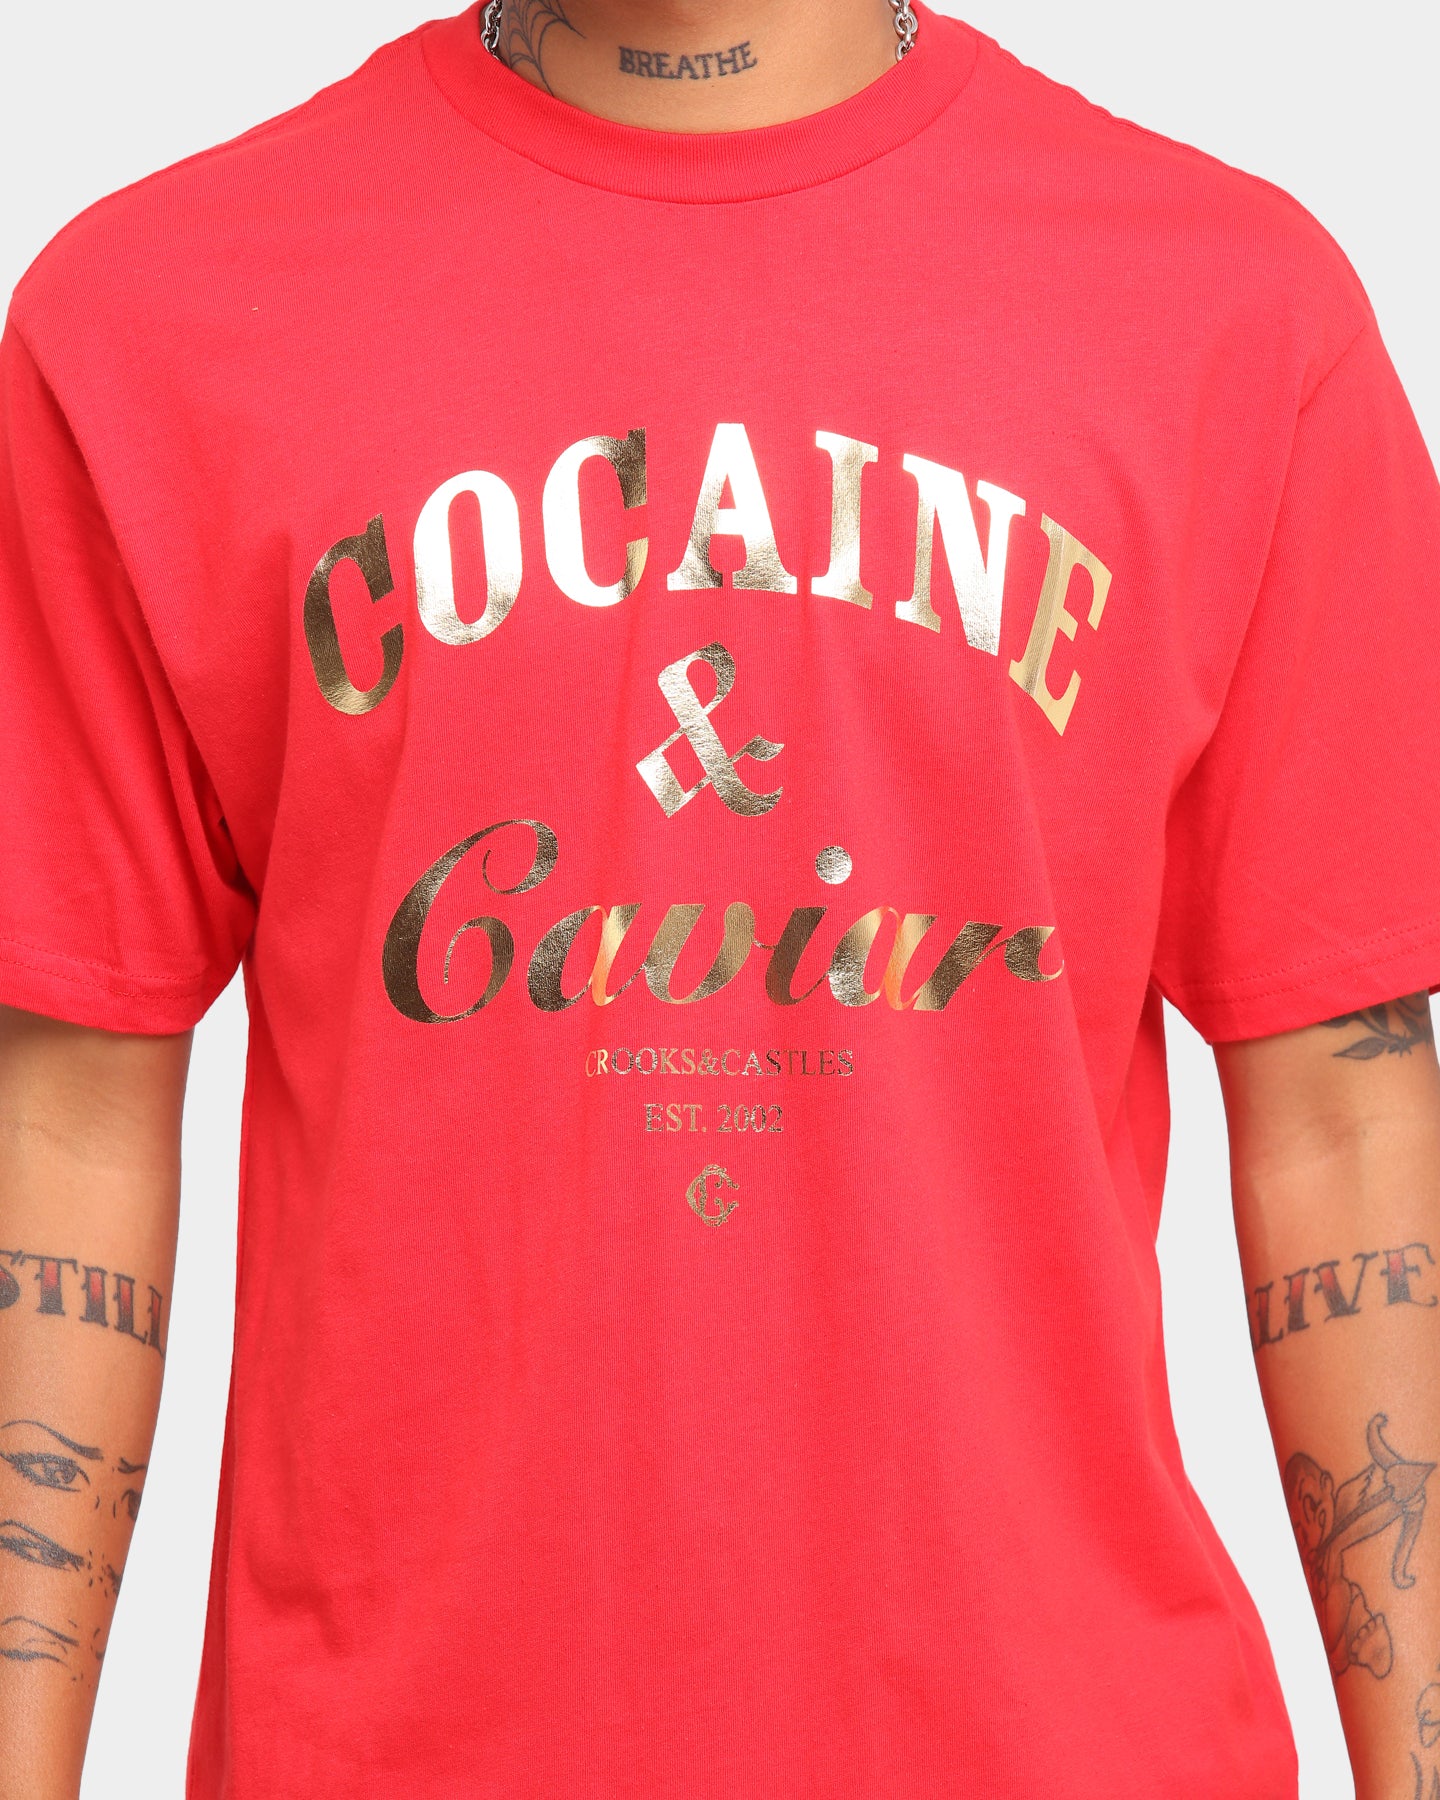 red and gold shirt mens